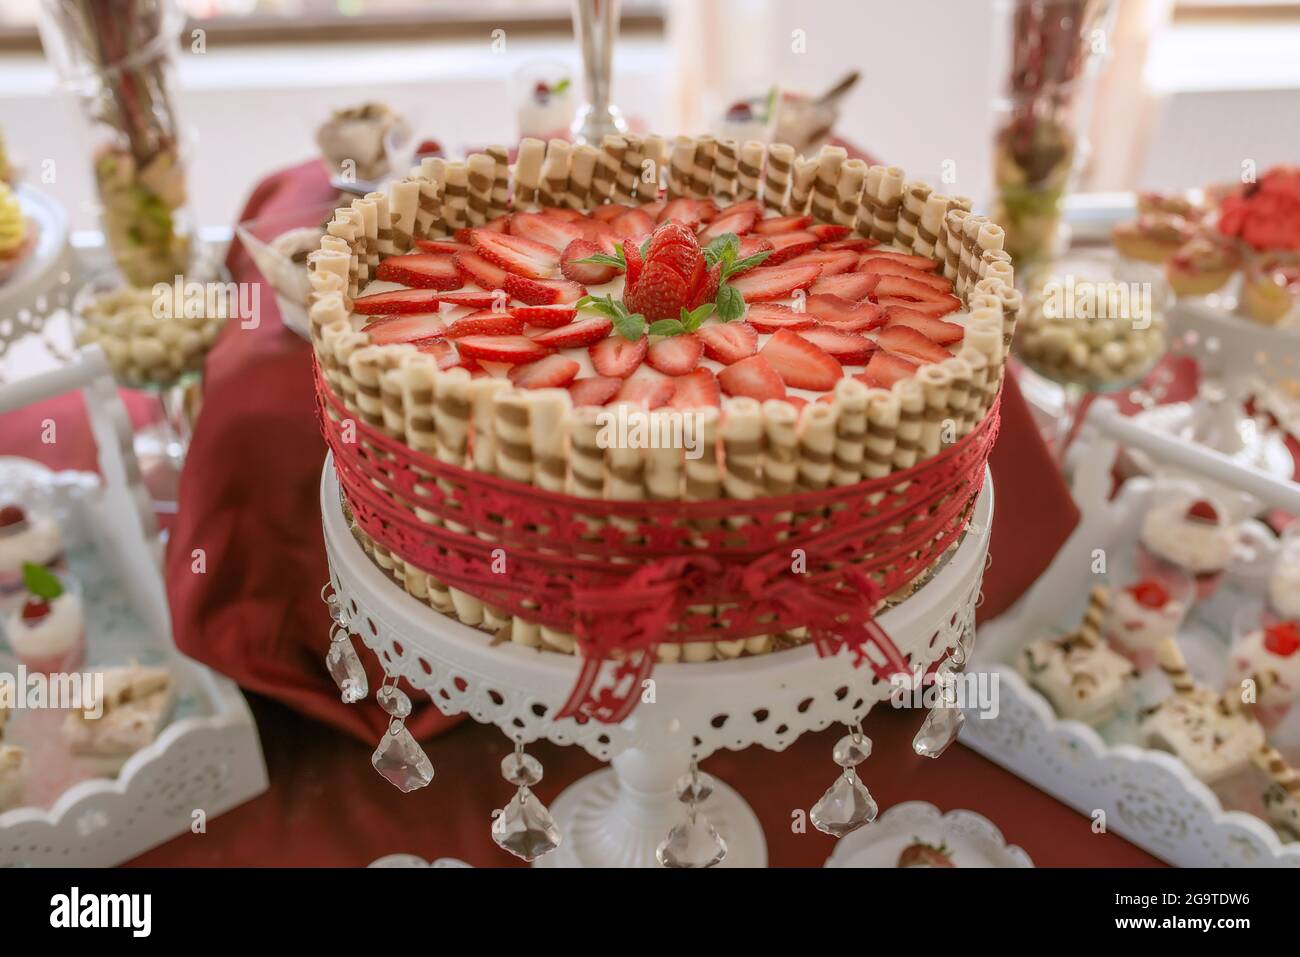 Delicious strawberry cheesecake, centerpiece at an event, birthday or wedding reception, decadent dessert decorated with thin strawberry slices Stock Photo